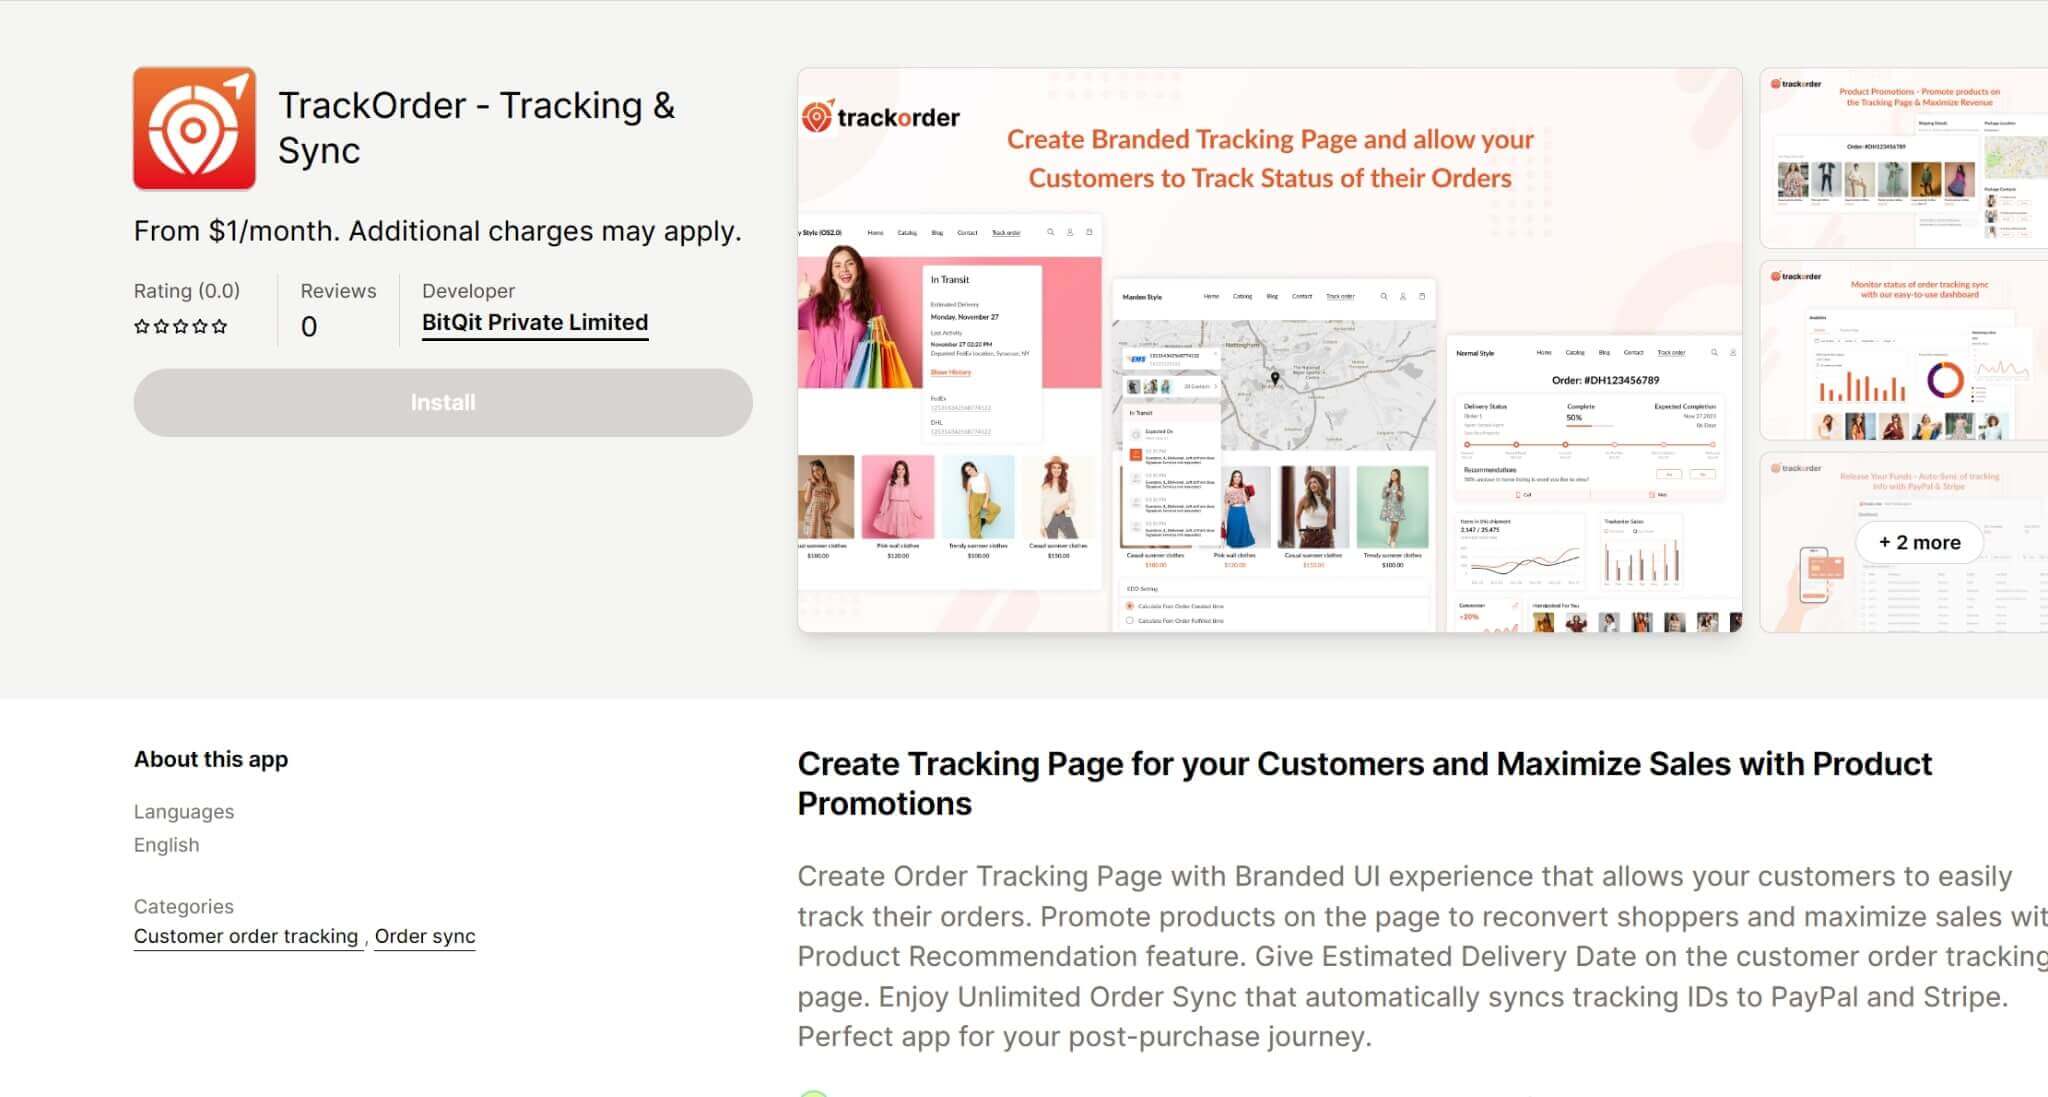 TrackOrder - Tracking & Sync